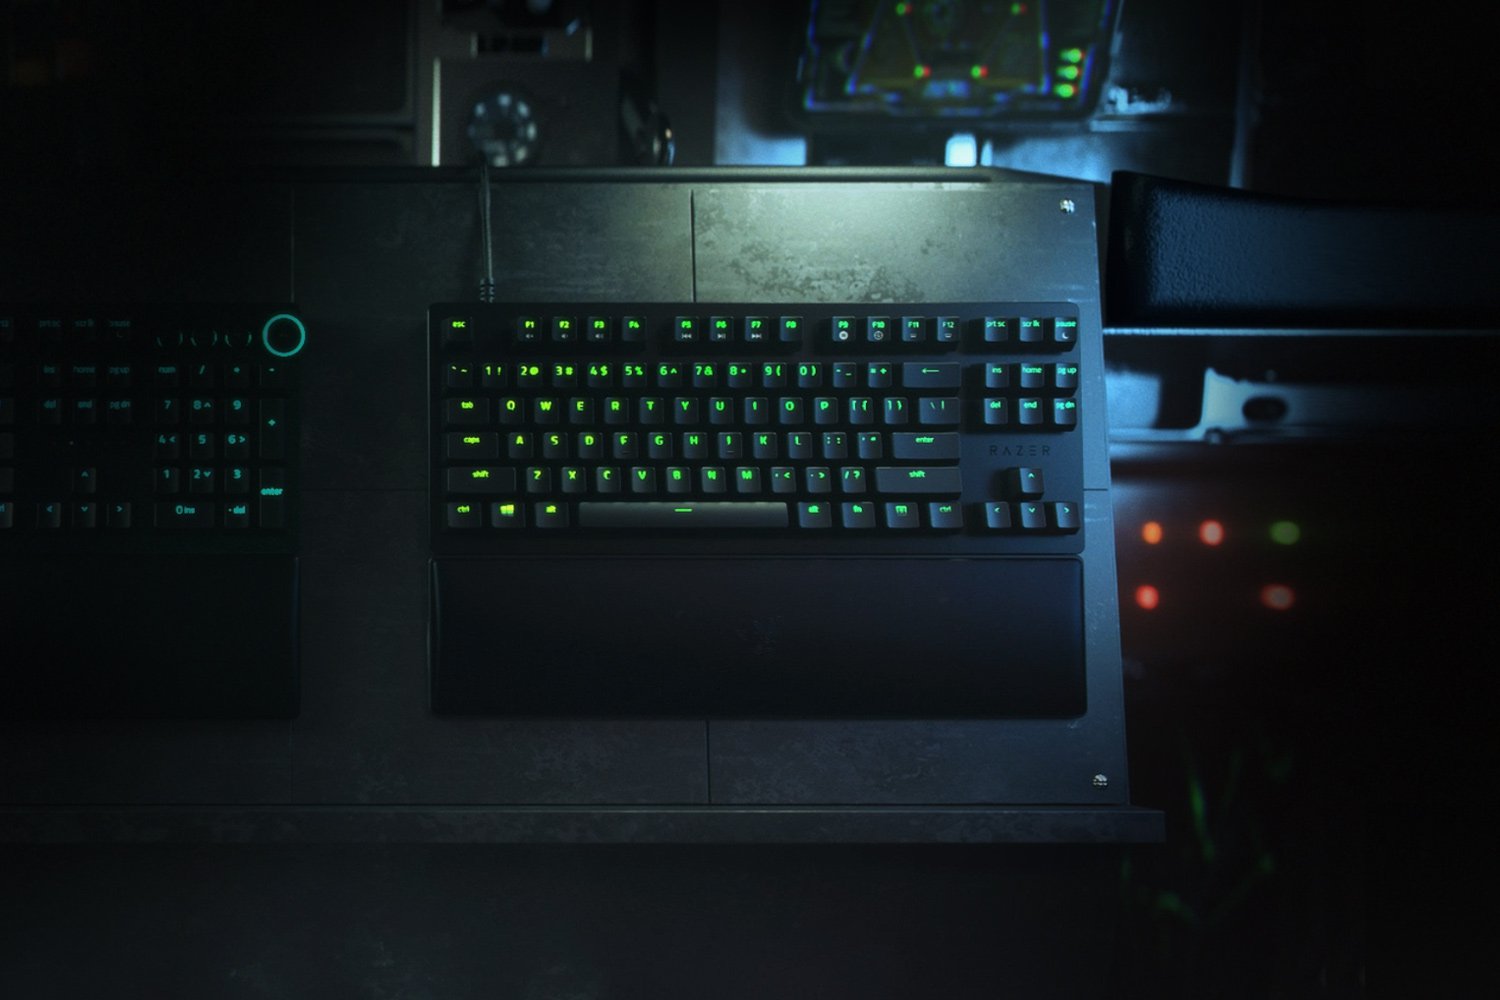  Razer Huntsman V2 TKL Gaming Keyboard: Fast Linear Optical  Switches Gen2, Sound Dampeners, 8000Hz Polling Rate, Detachable Type-C  Cable, UV-Coated Keycaps, Wrist Rest - ESL Edition : Electronics